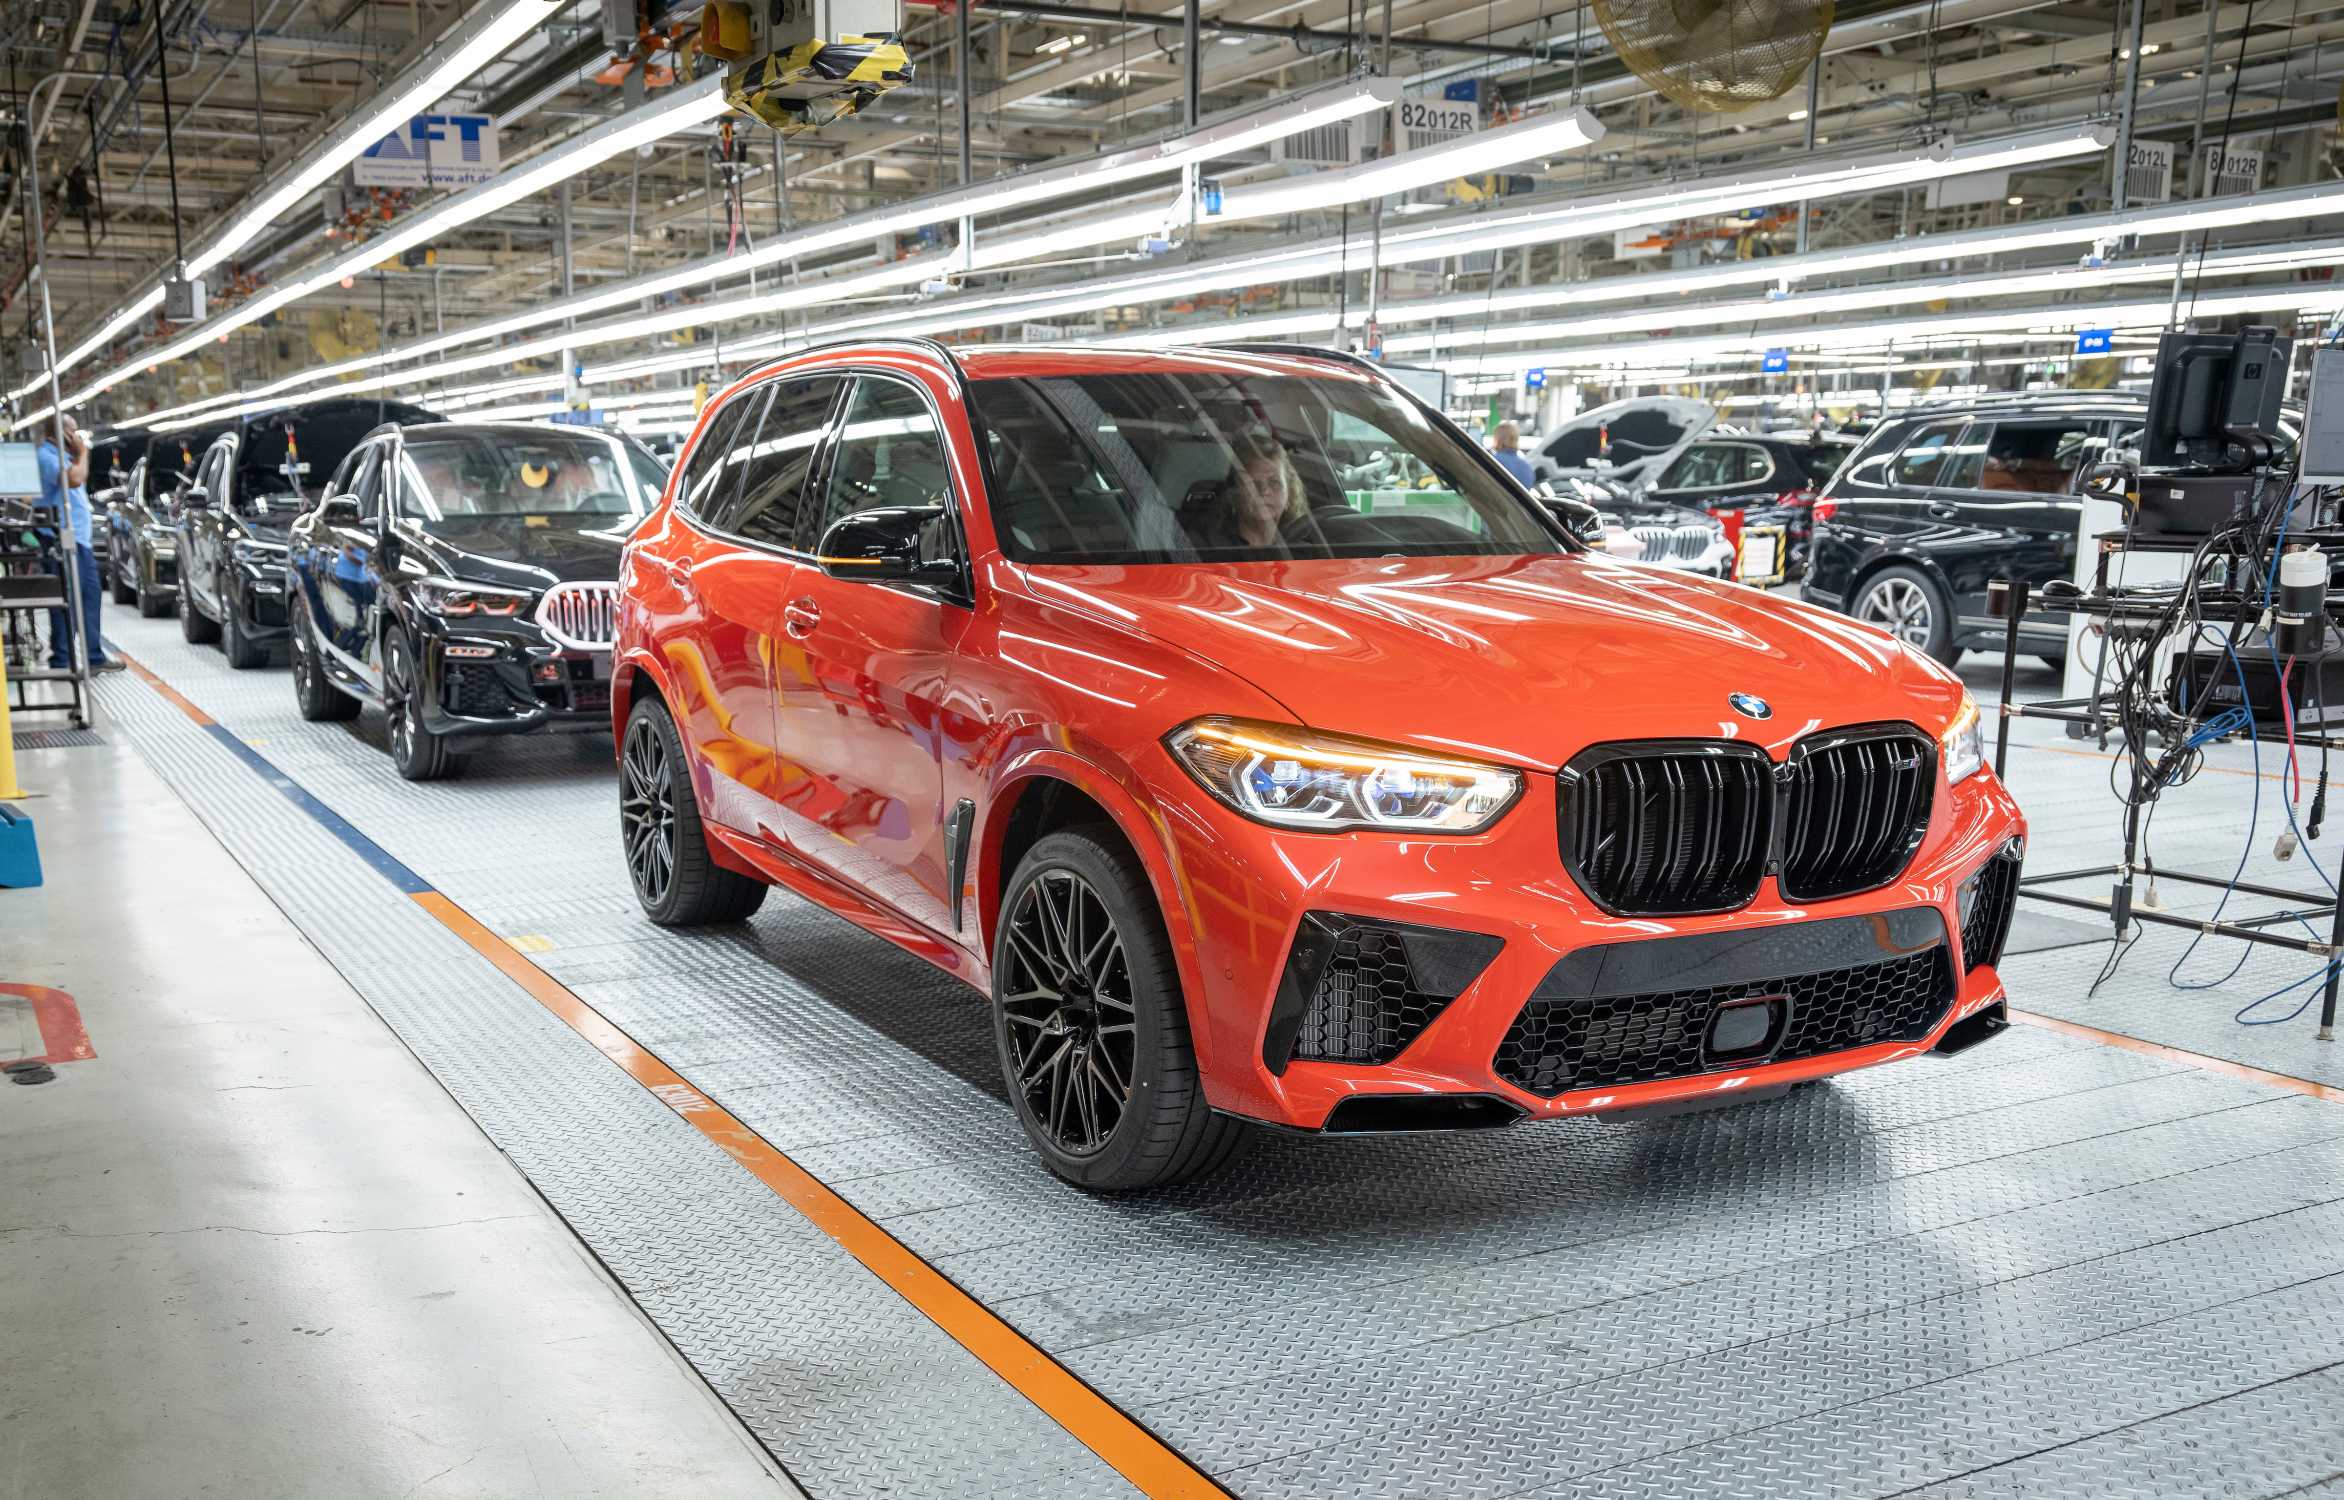 Five Millionth Bmw Built In The U S